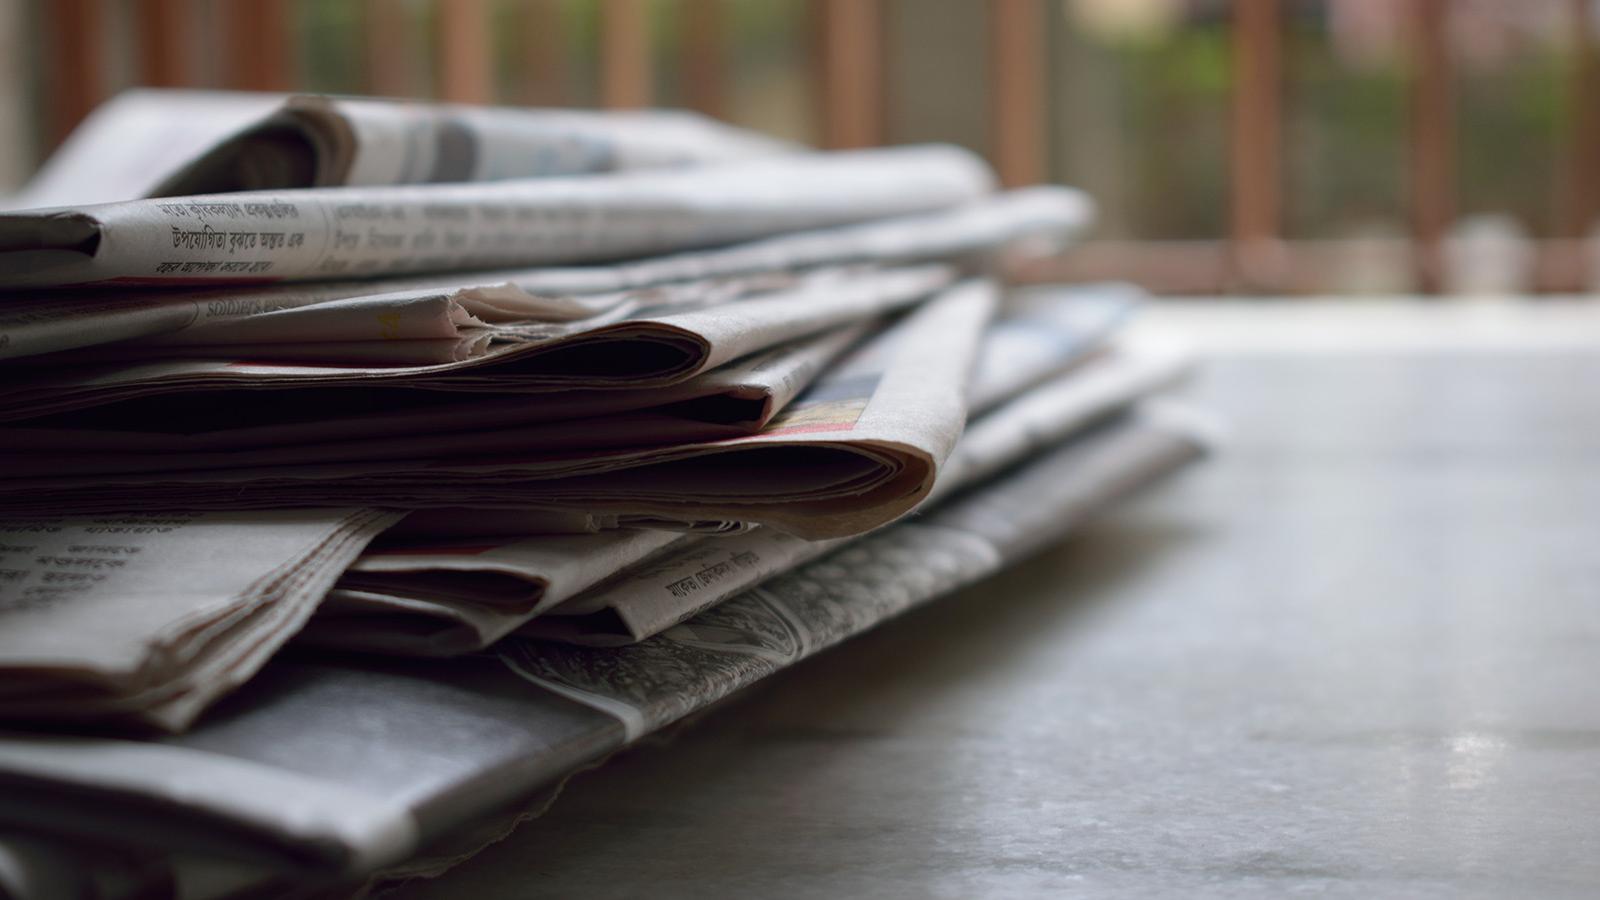 Newspapers on a table. Photo by brotiN biswaS from Pexels